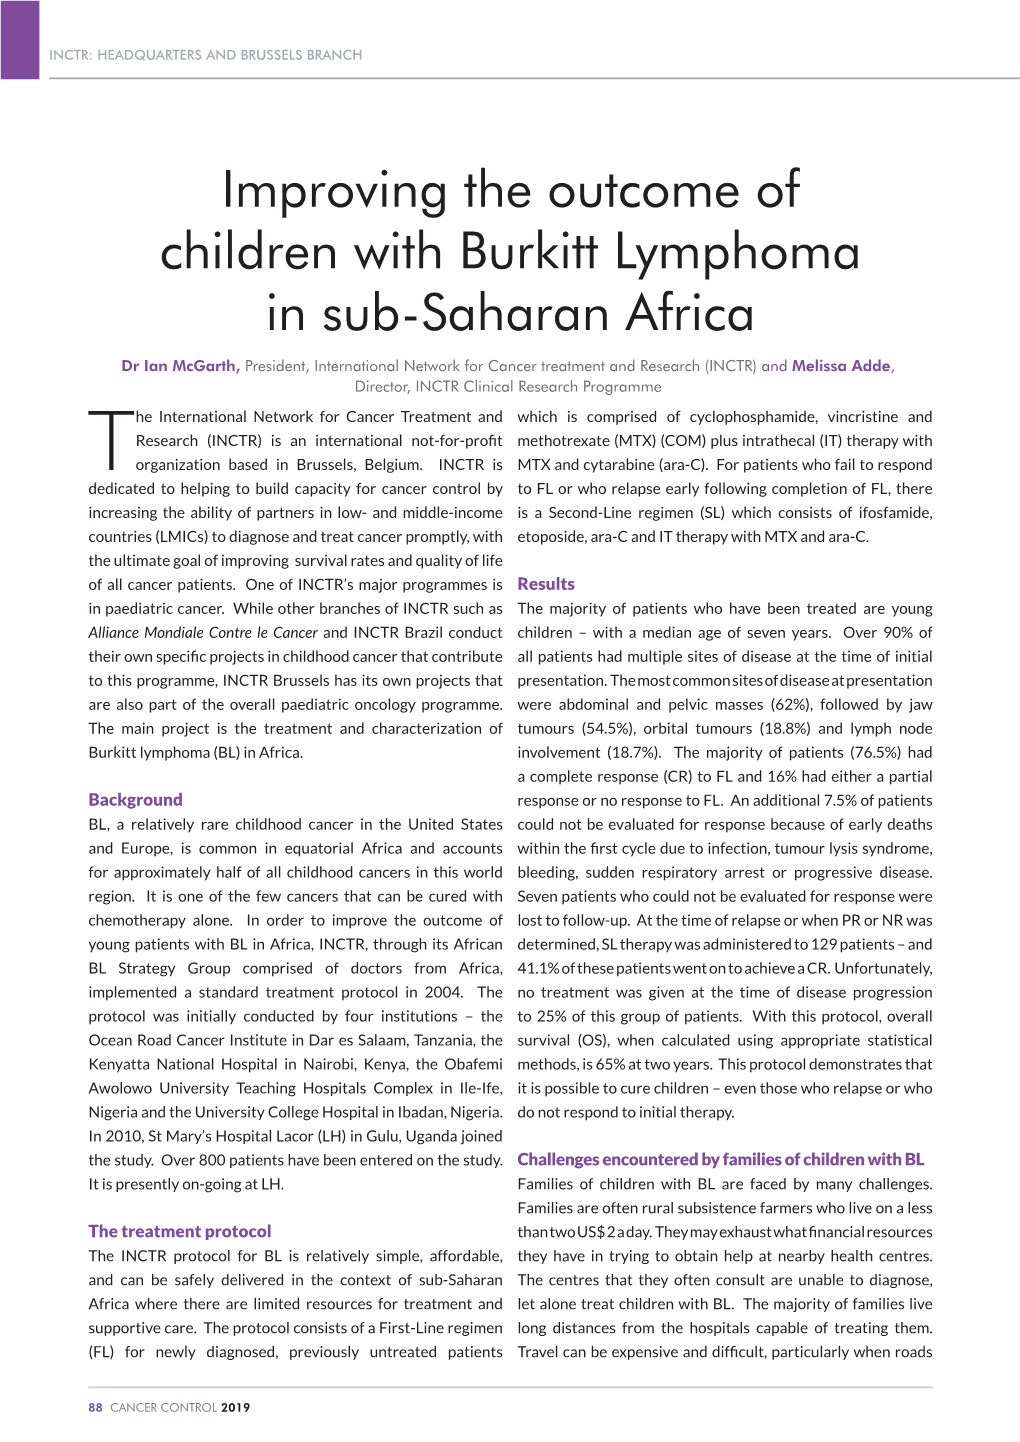 Improving the Outcome of Children with Burkitt Lymphoma in Sub-Saharan Africa